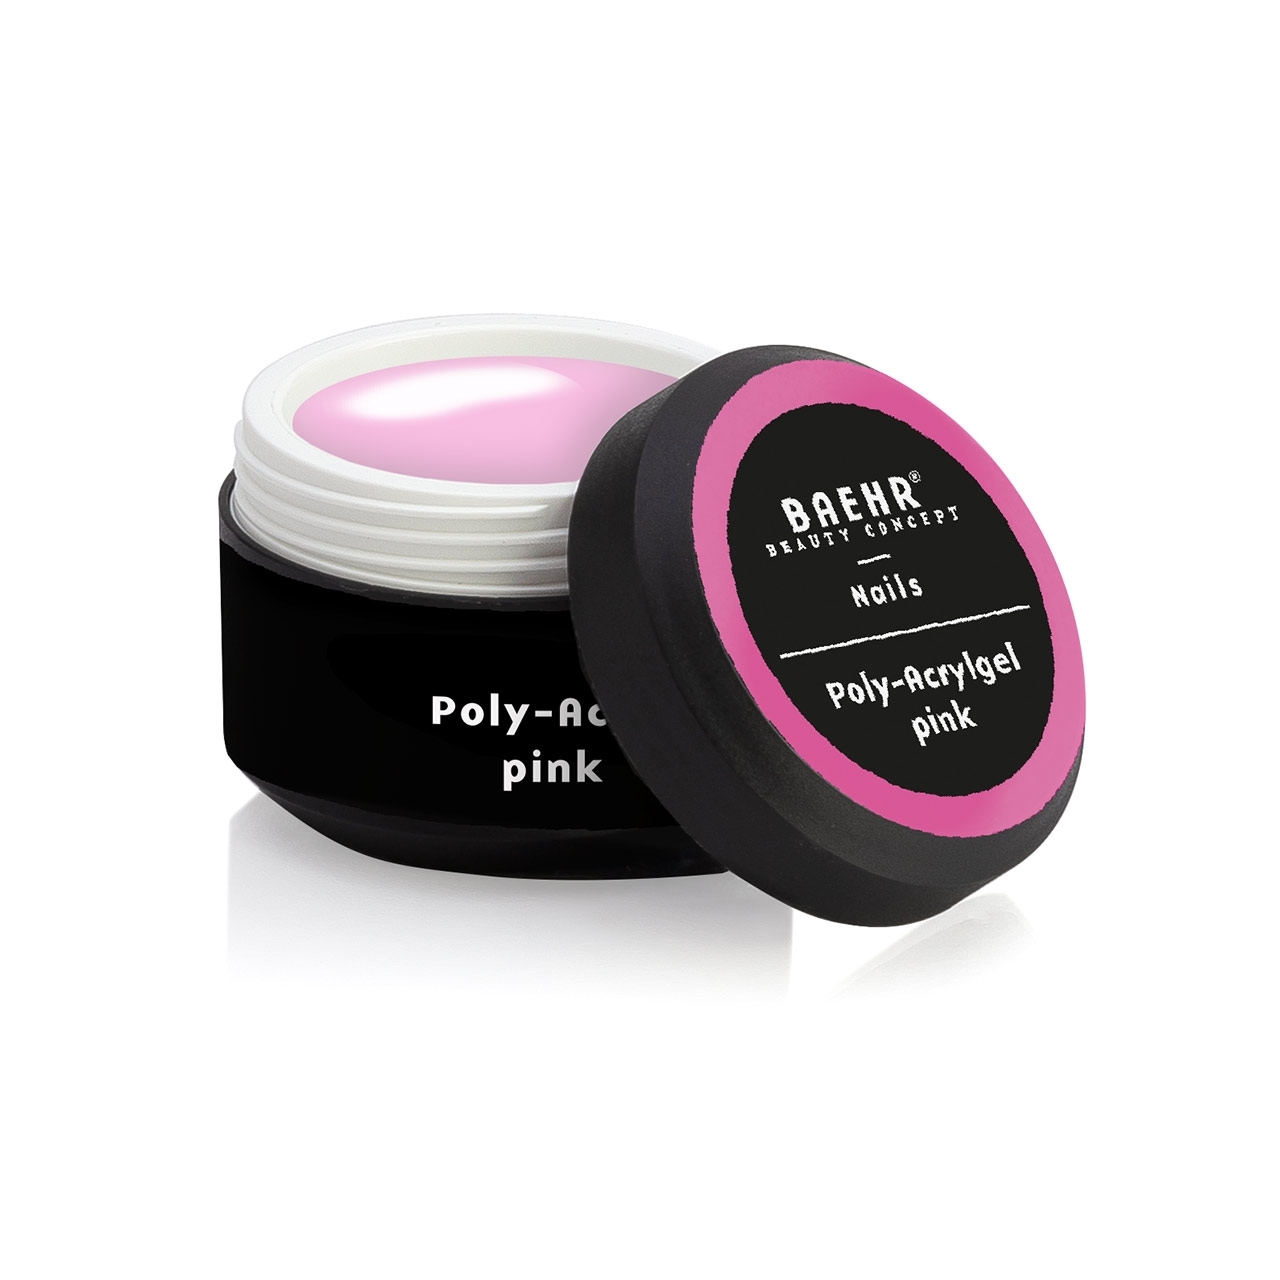 BAEHR BEAUTY CONCEPT - NAILS Poly-Acrylgel pink 30 ml